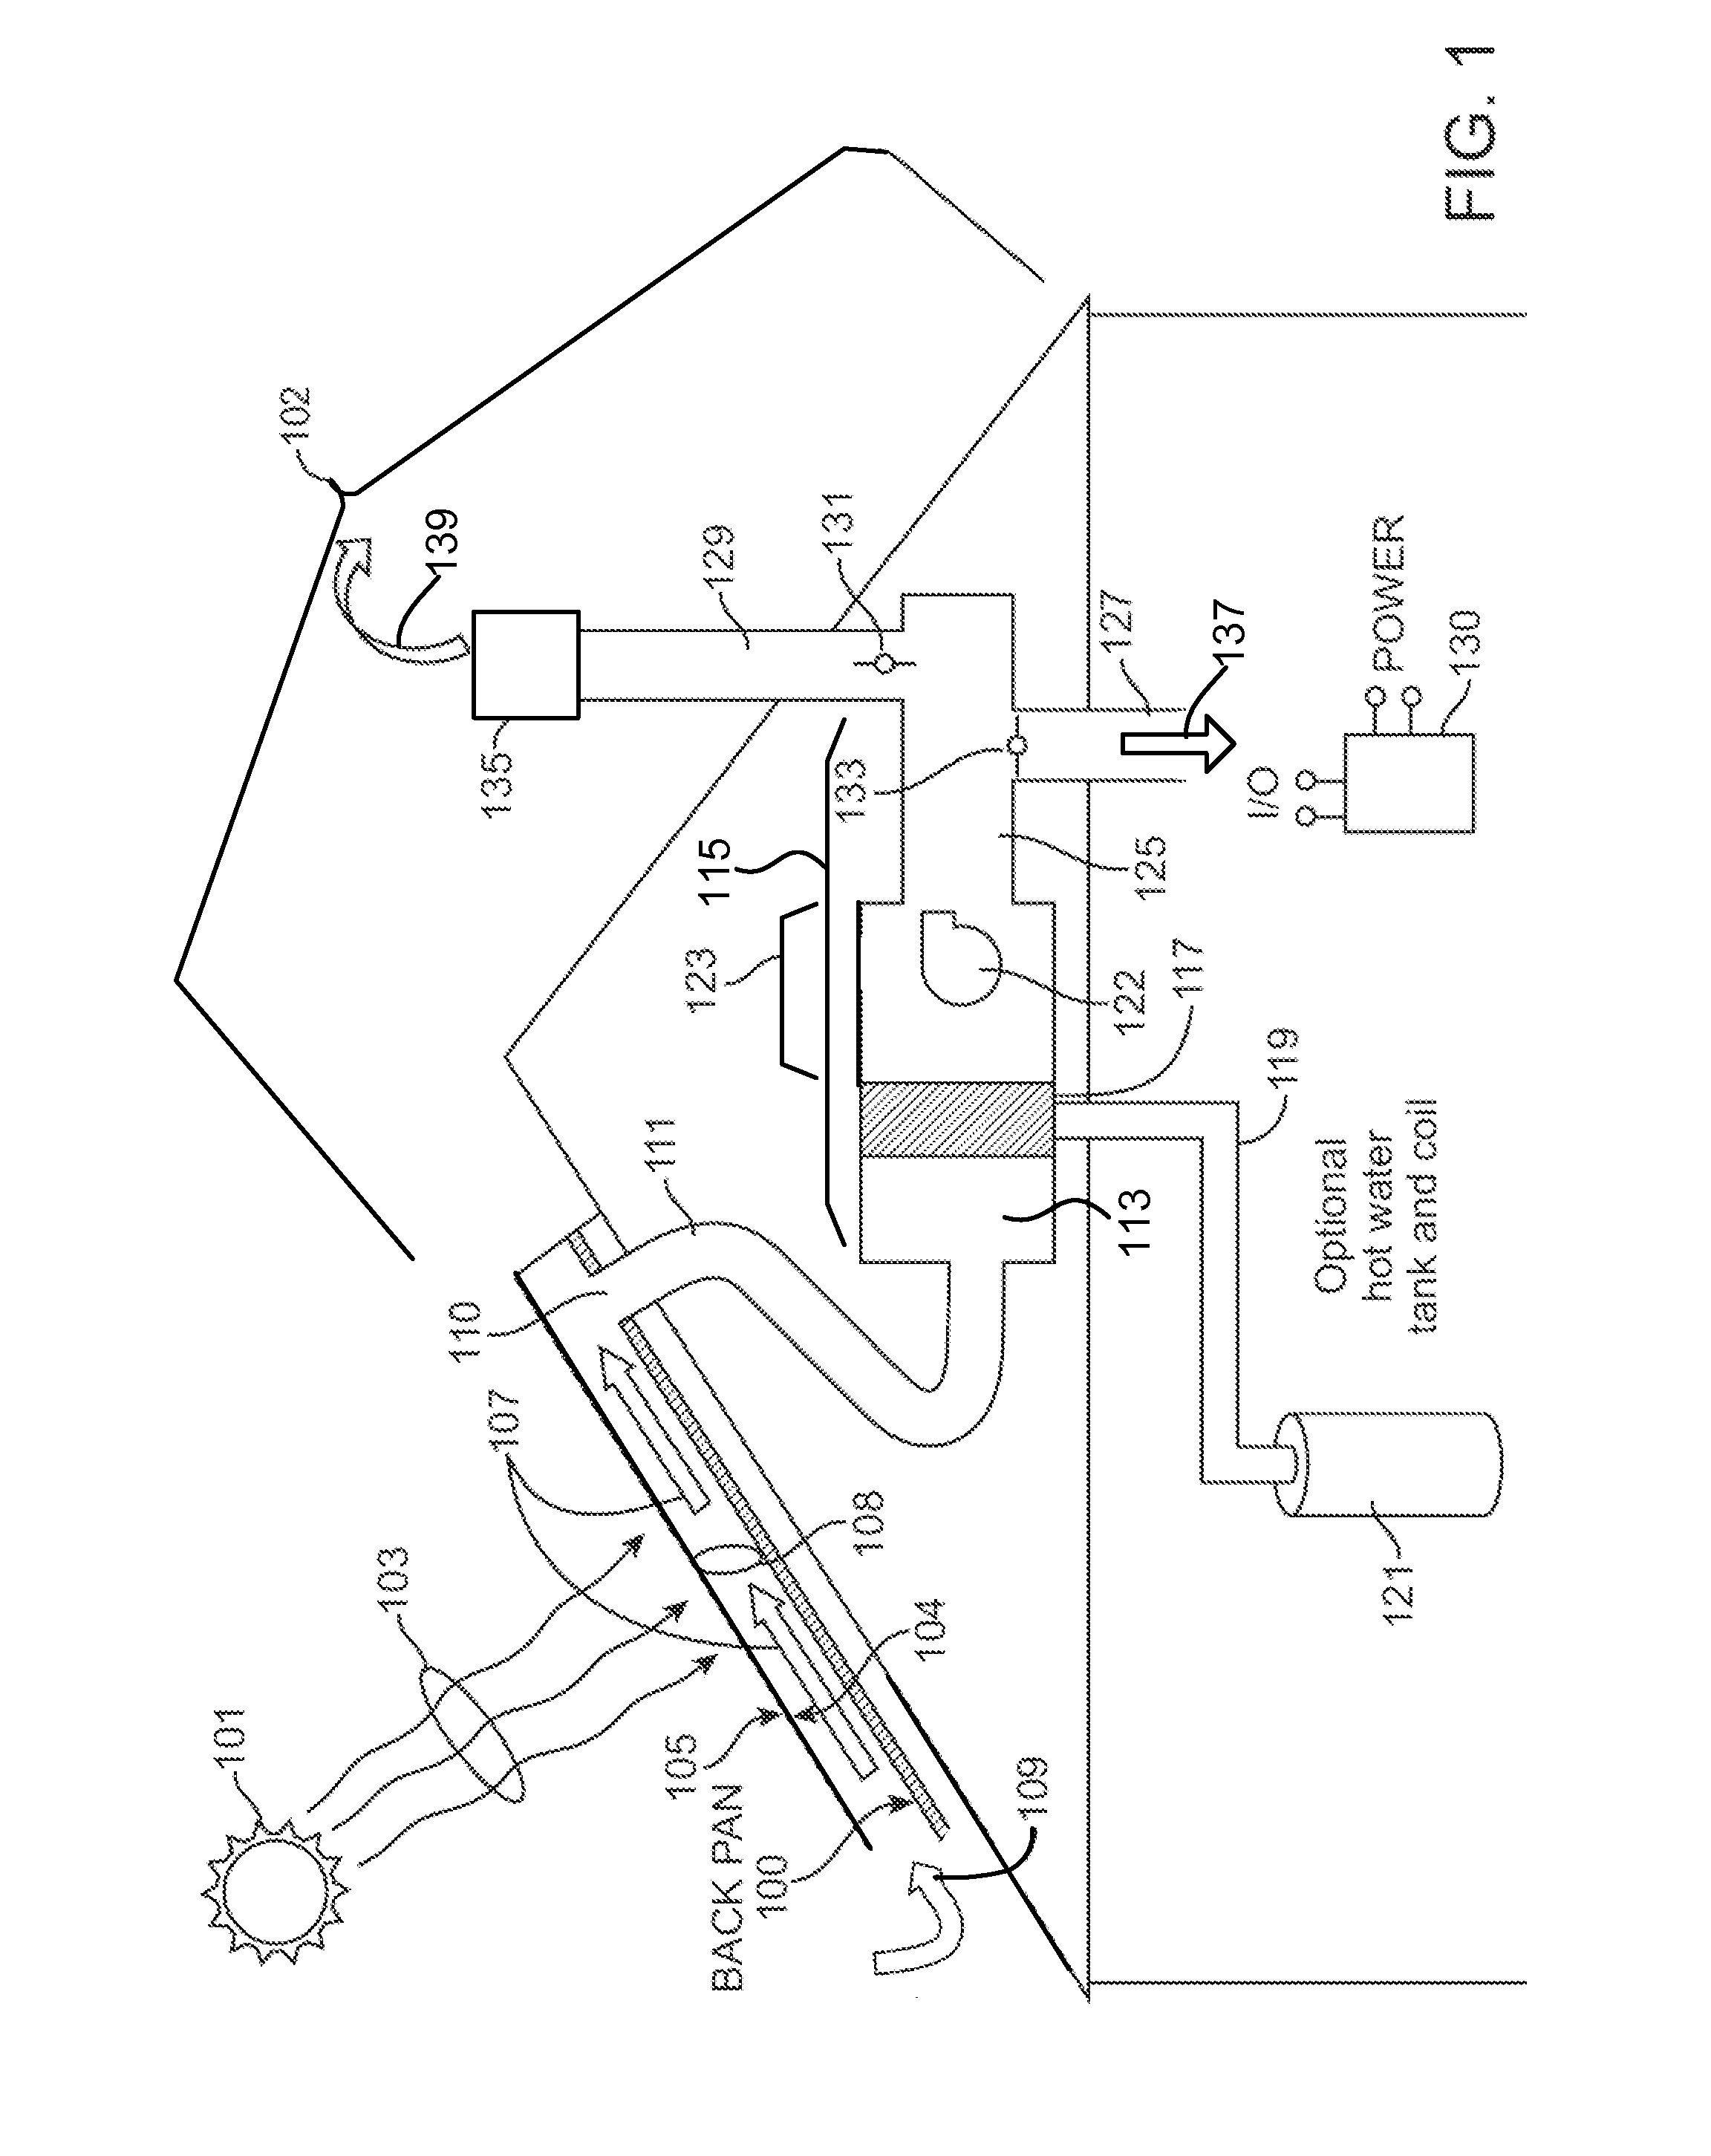 Integrated thermal module and back plate structure and related methods